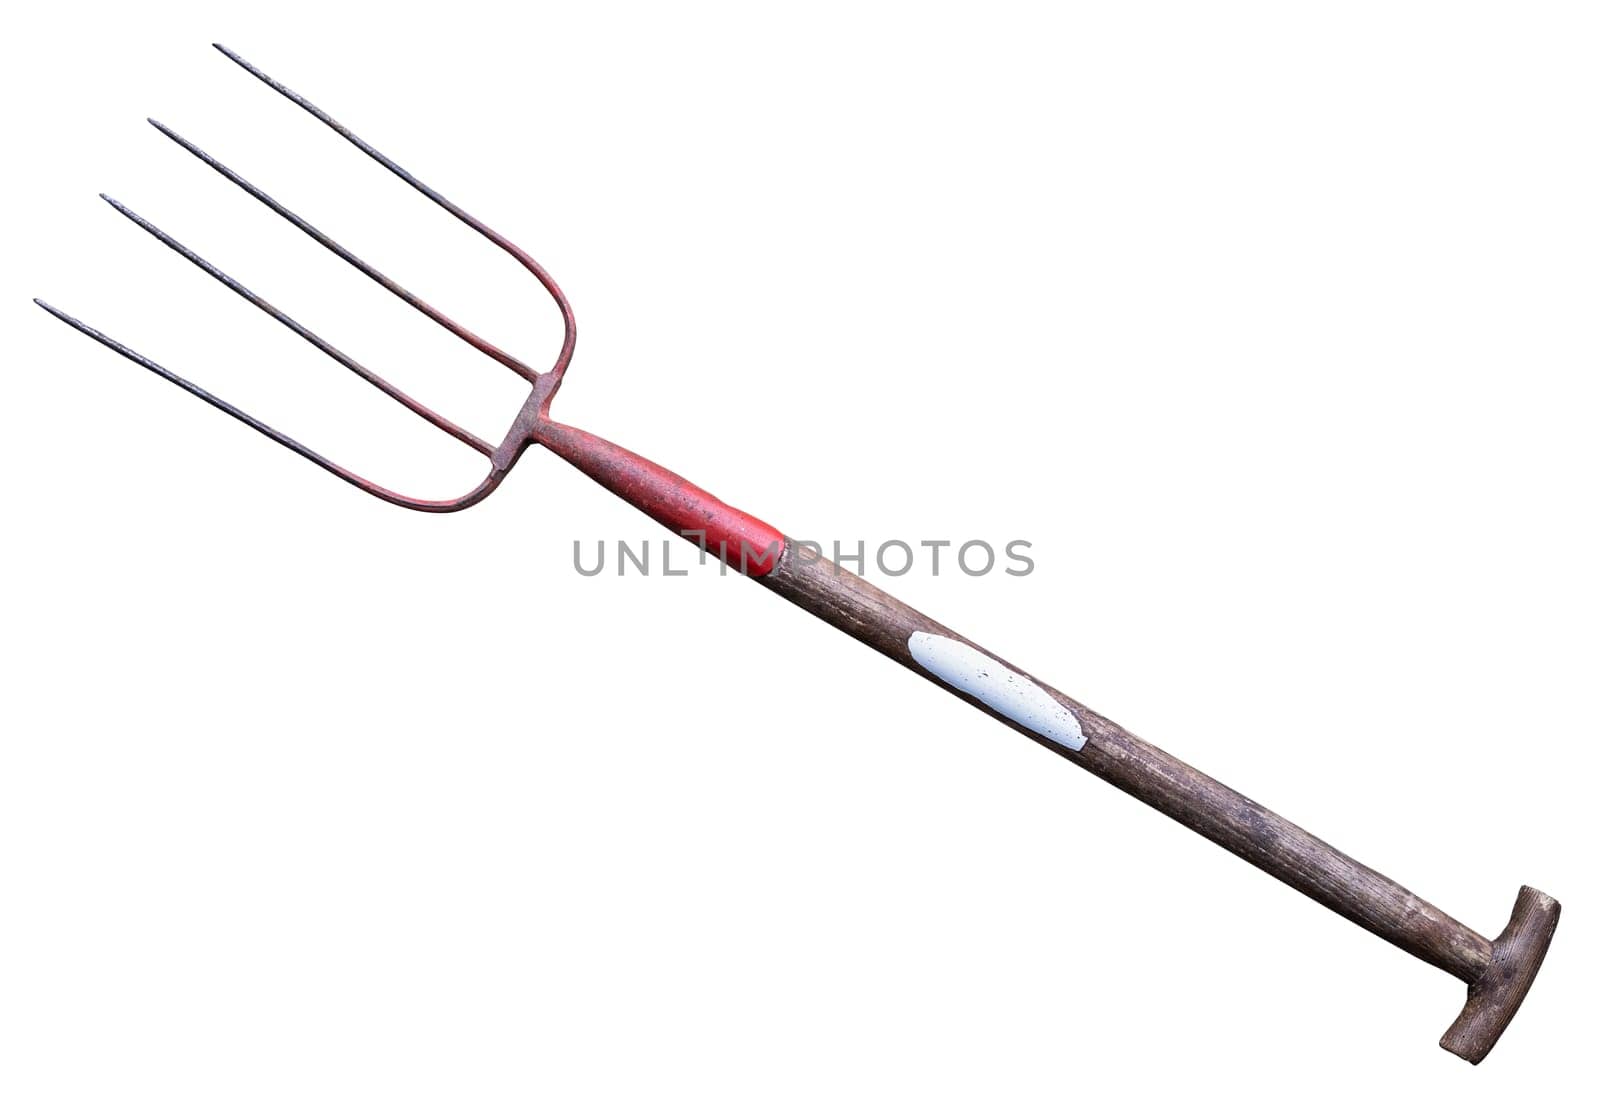 A Vintage Rustic Pitchfork Isolated On A White Background